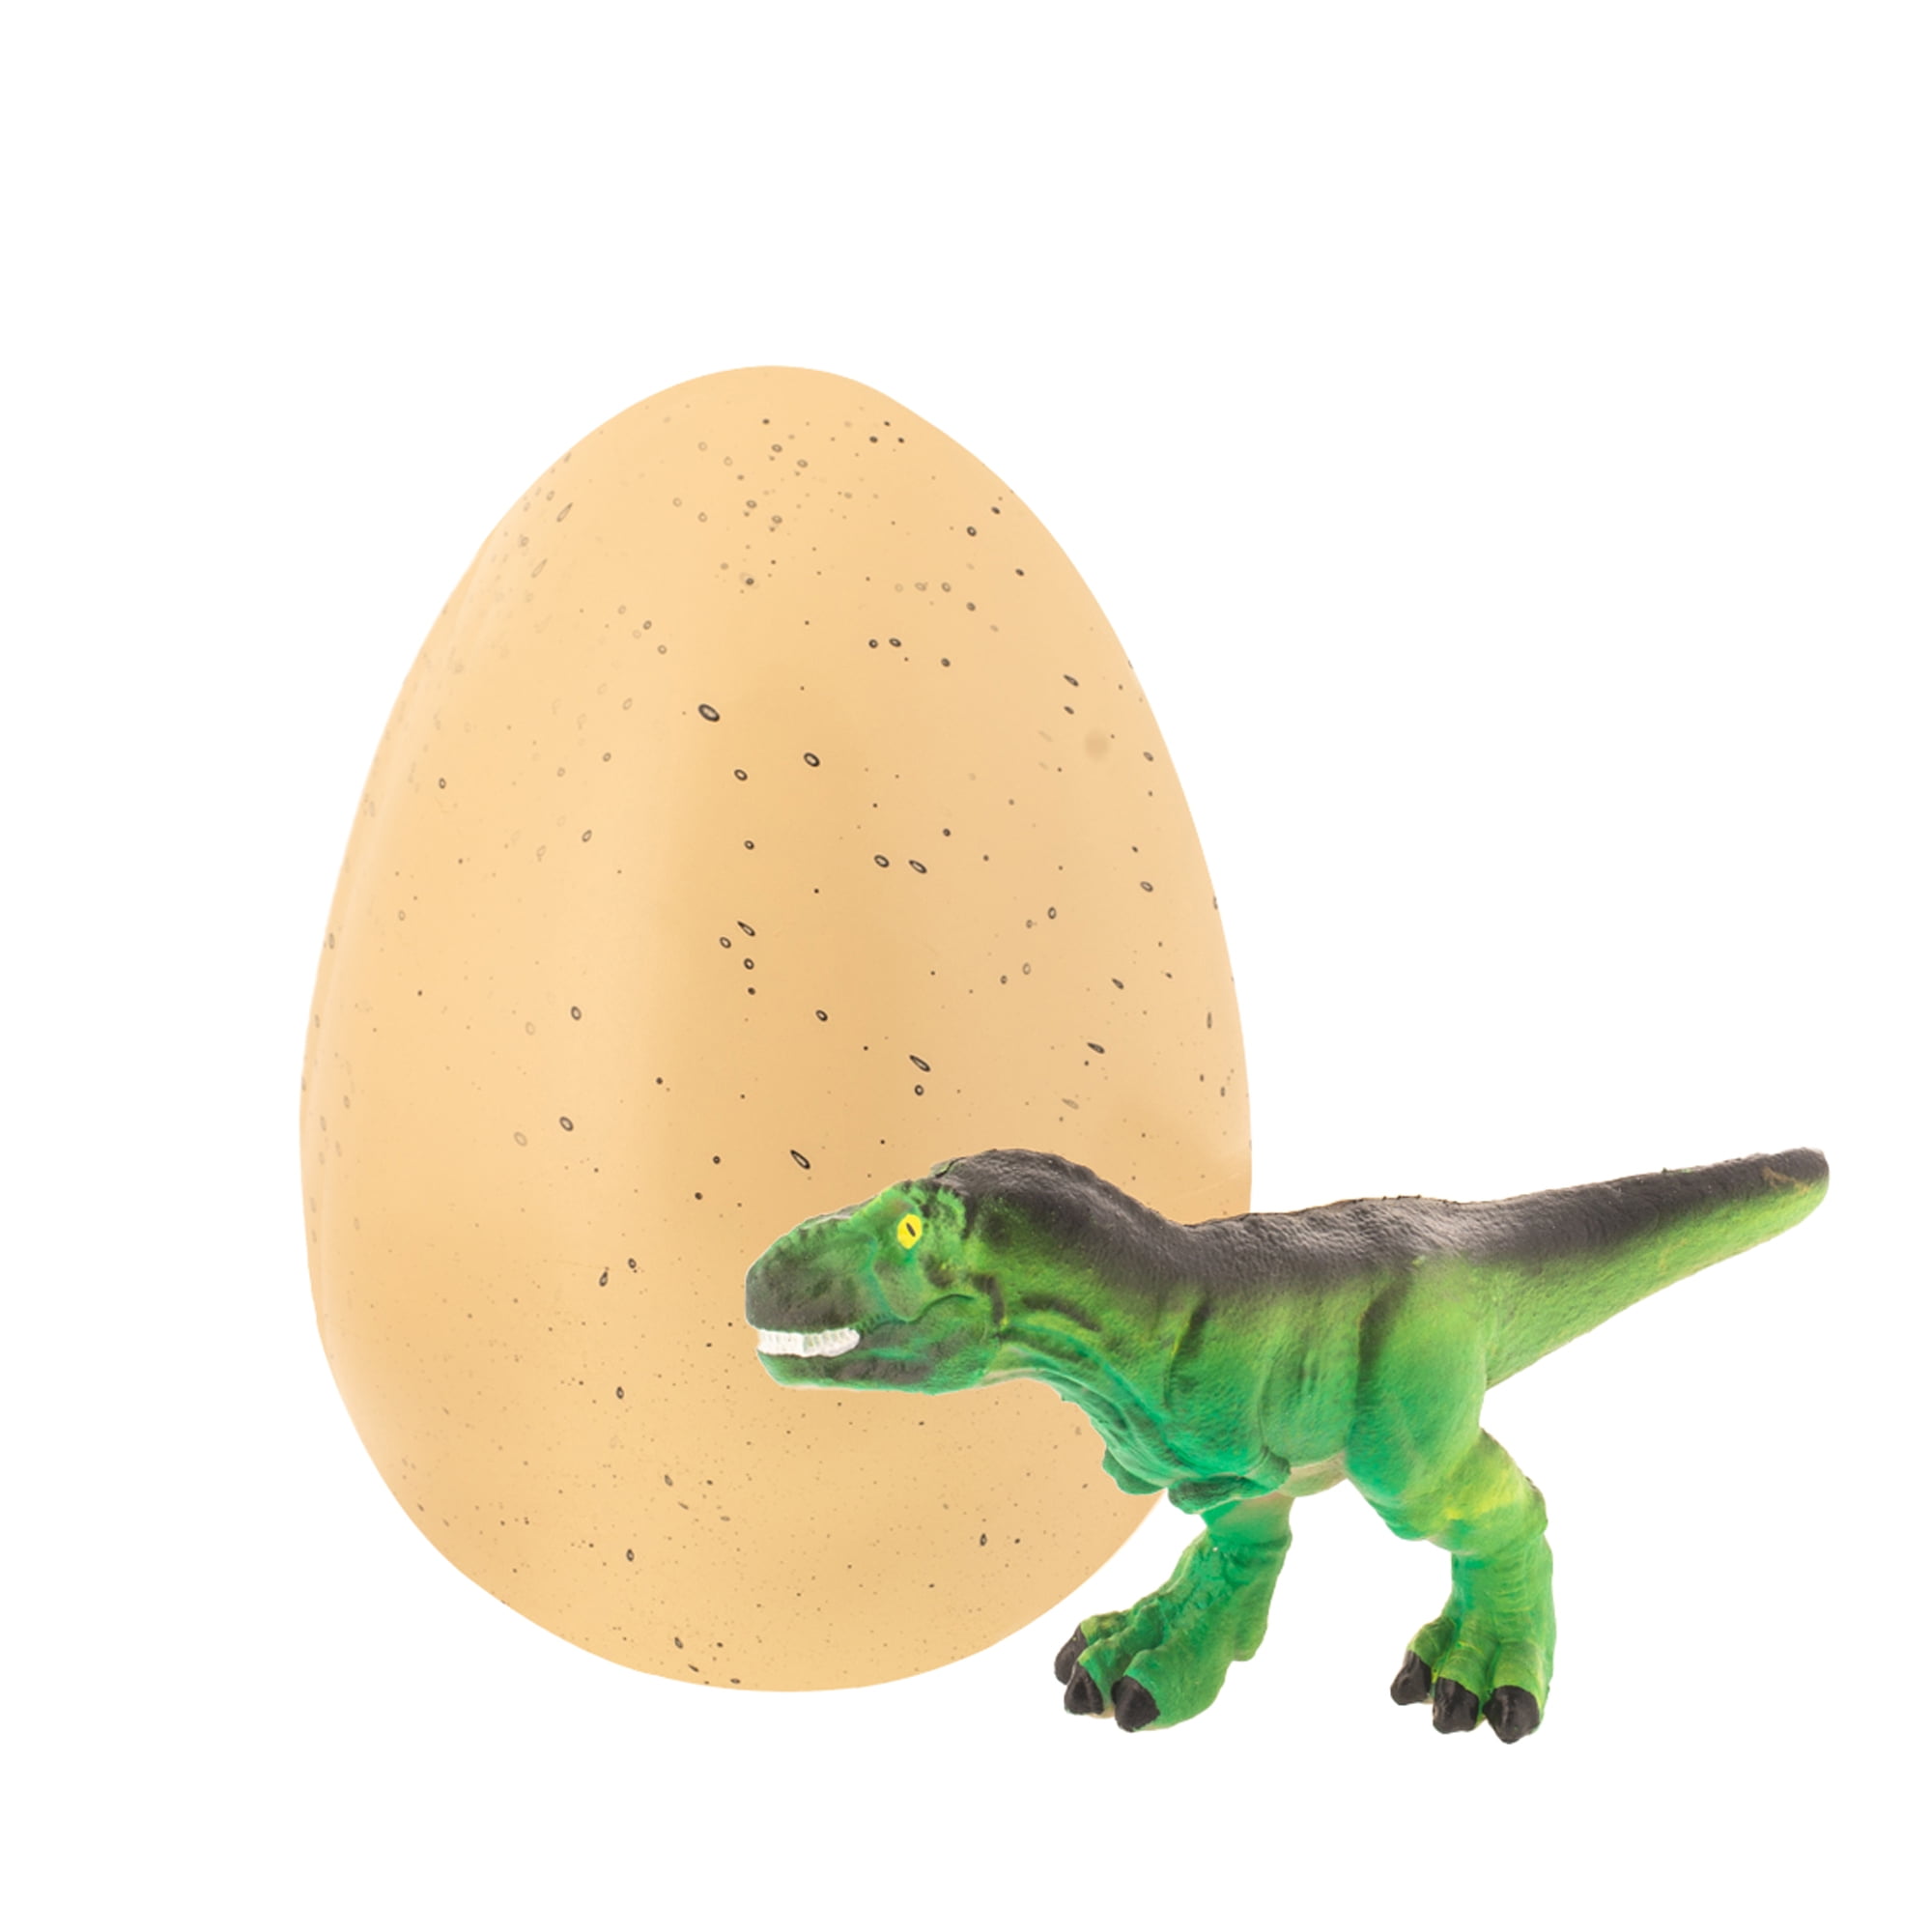 GROWING DINOSAUR IN EGG 1 PC PET NOVELTY TOY FIGURE JURASSIC SCIENCE MAGIC KIDS 